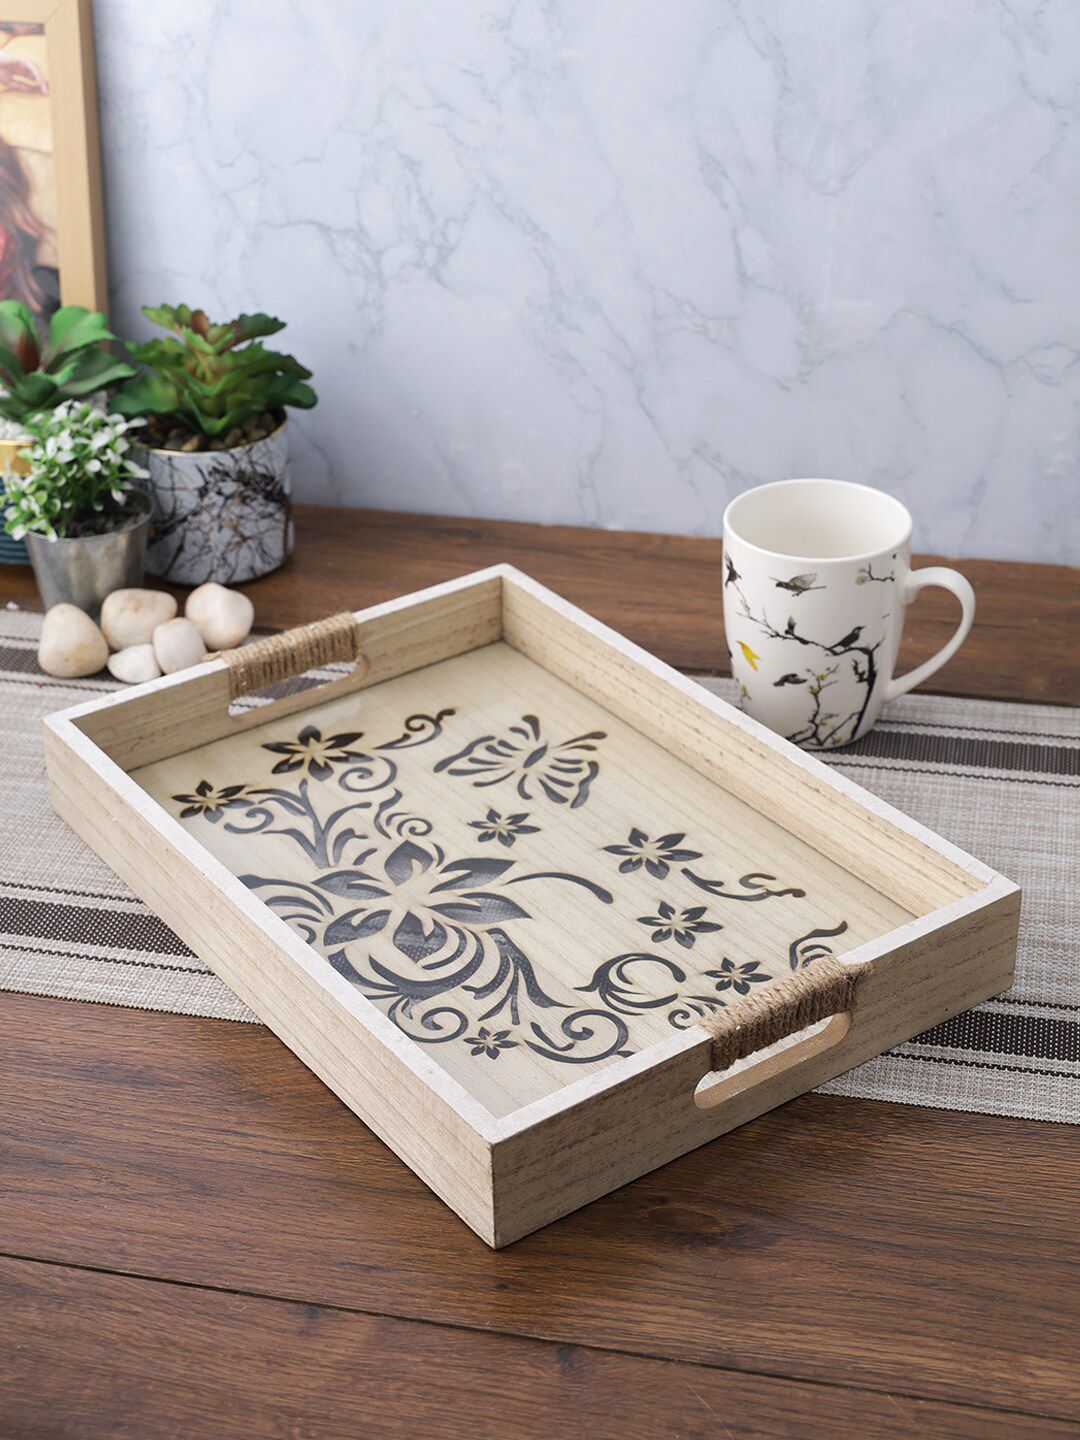 Aapno Rajasthan Beige Cutwork Handcrafted Wooden Tray Price in India